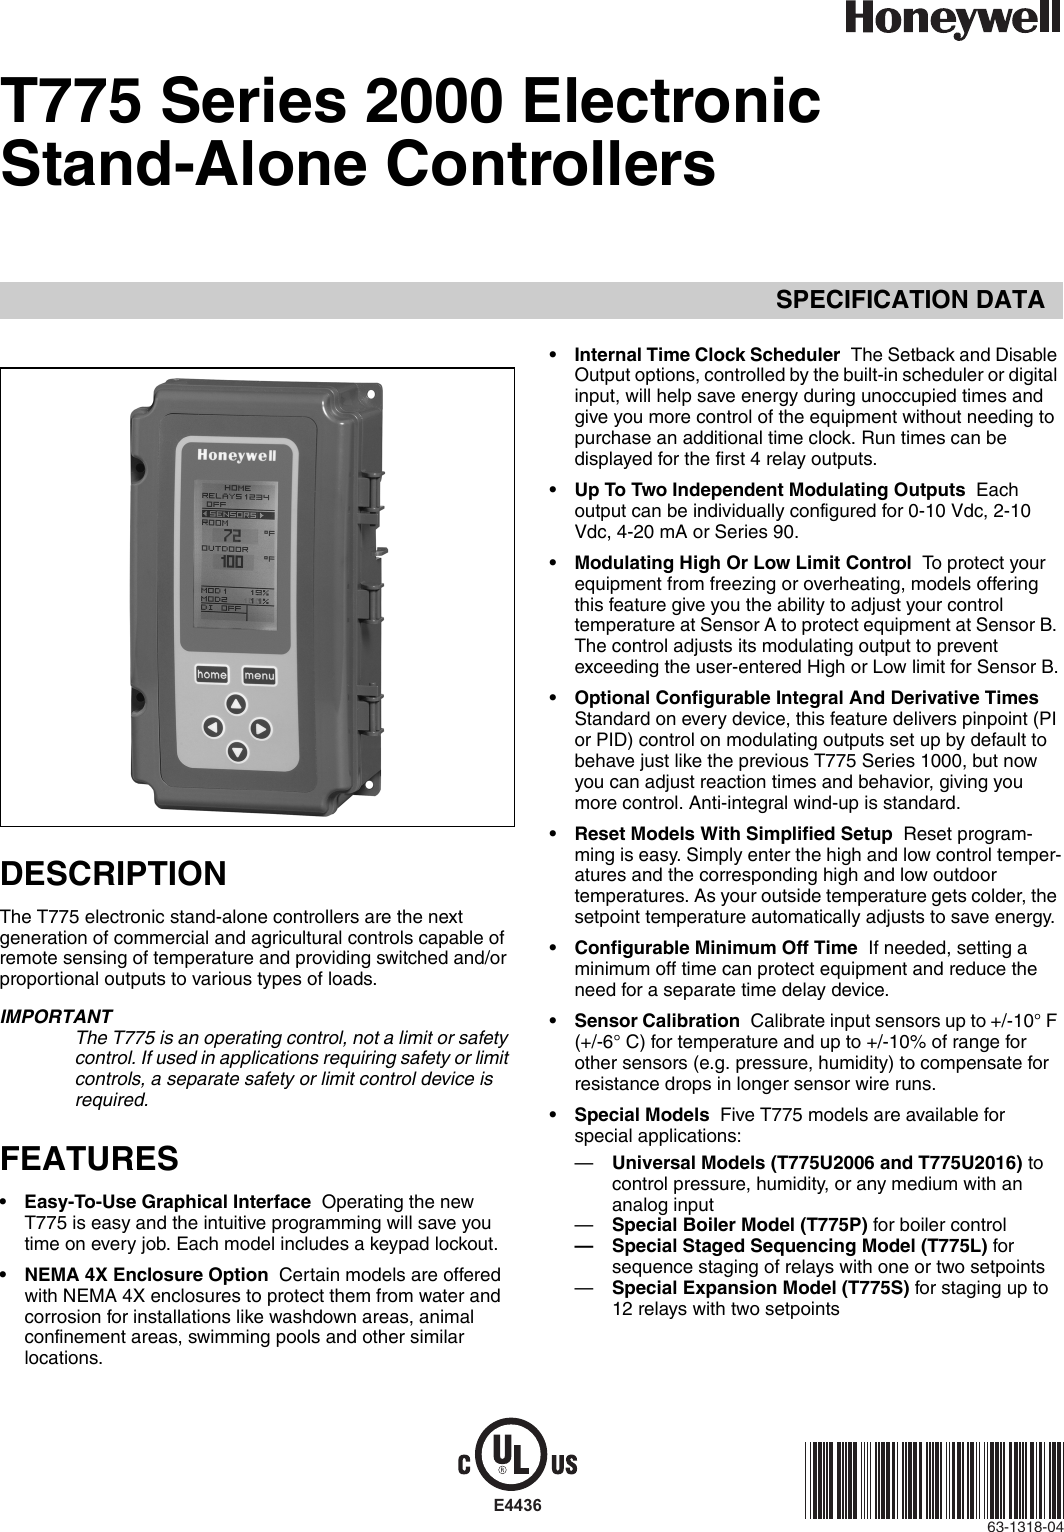 Page 1 of 4 - 63-1318—04 - T775 Series 2000 Electronic Stand-Alone Controllers